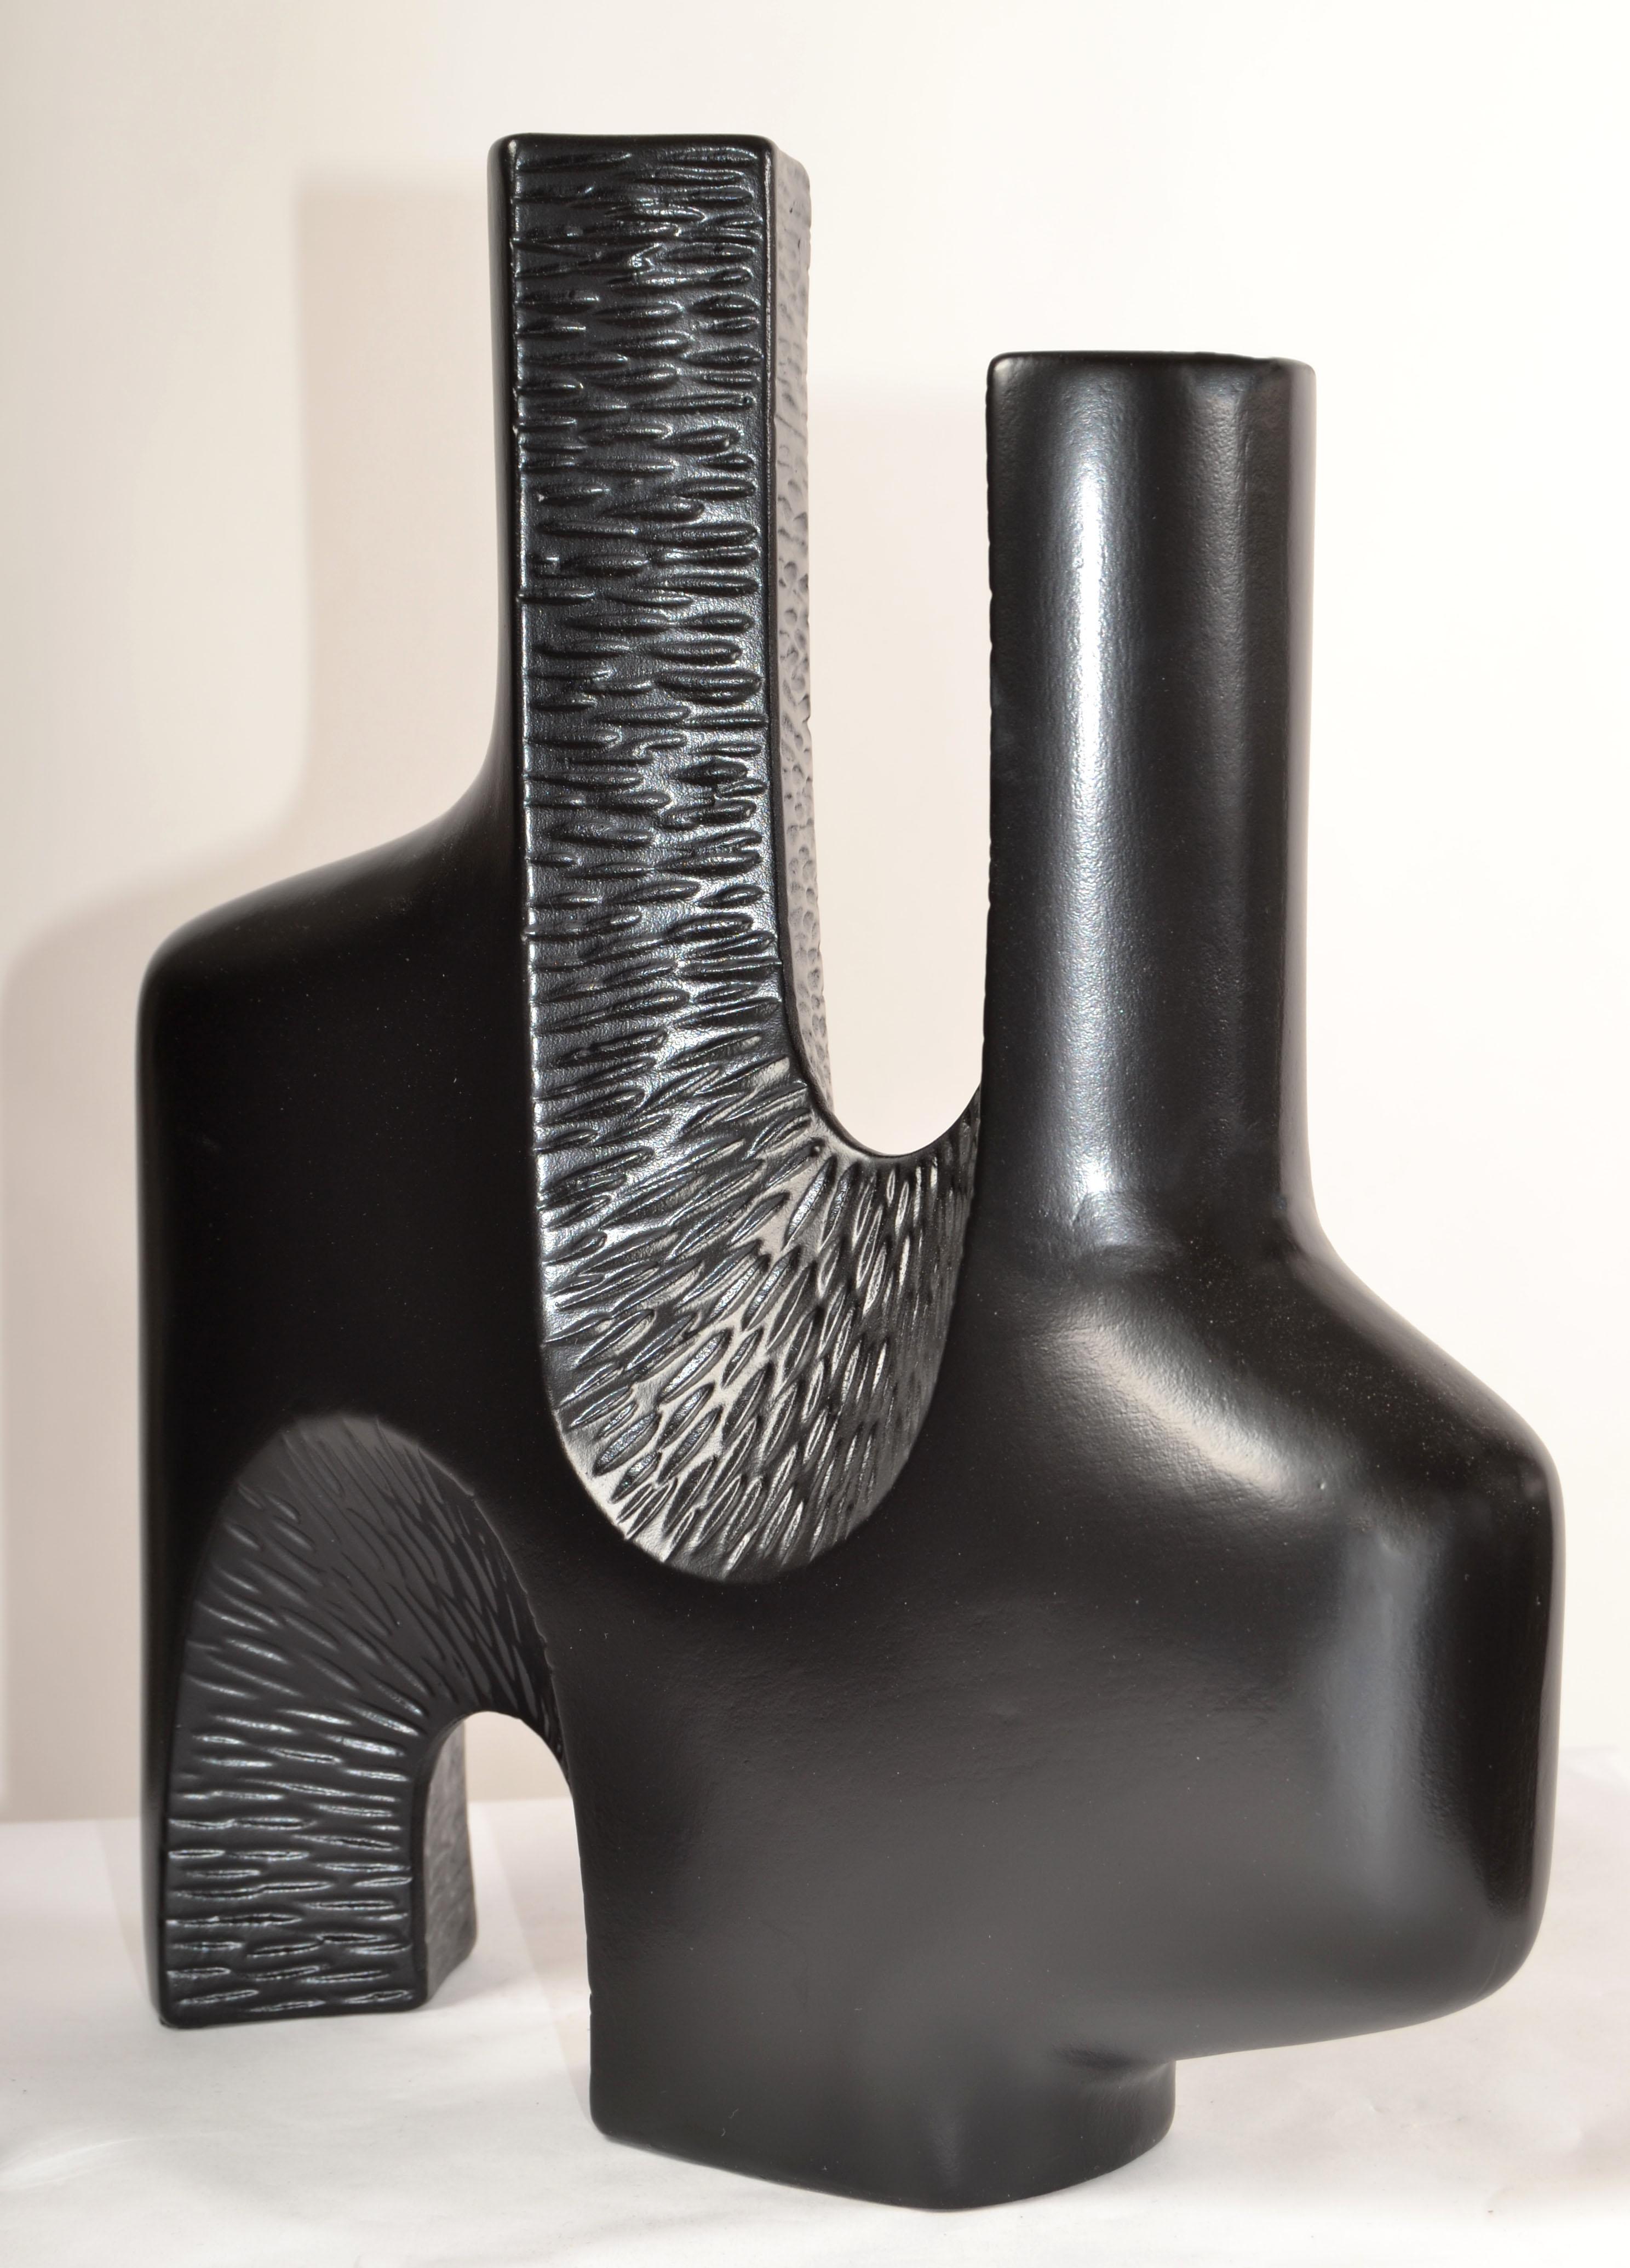 1980s Abstract Textured Two Neck Vase Vessel Black Finish Mid-Century Modern For Sale 1